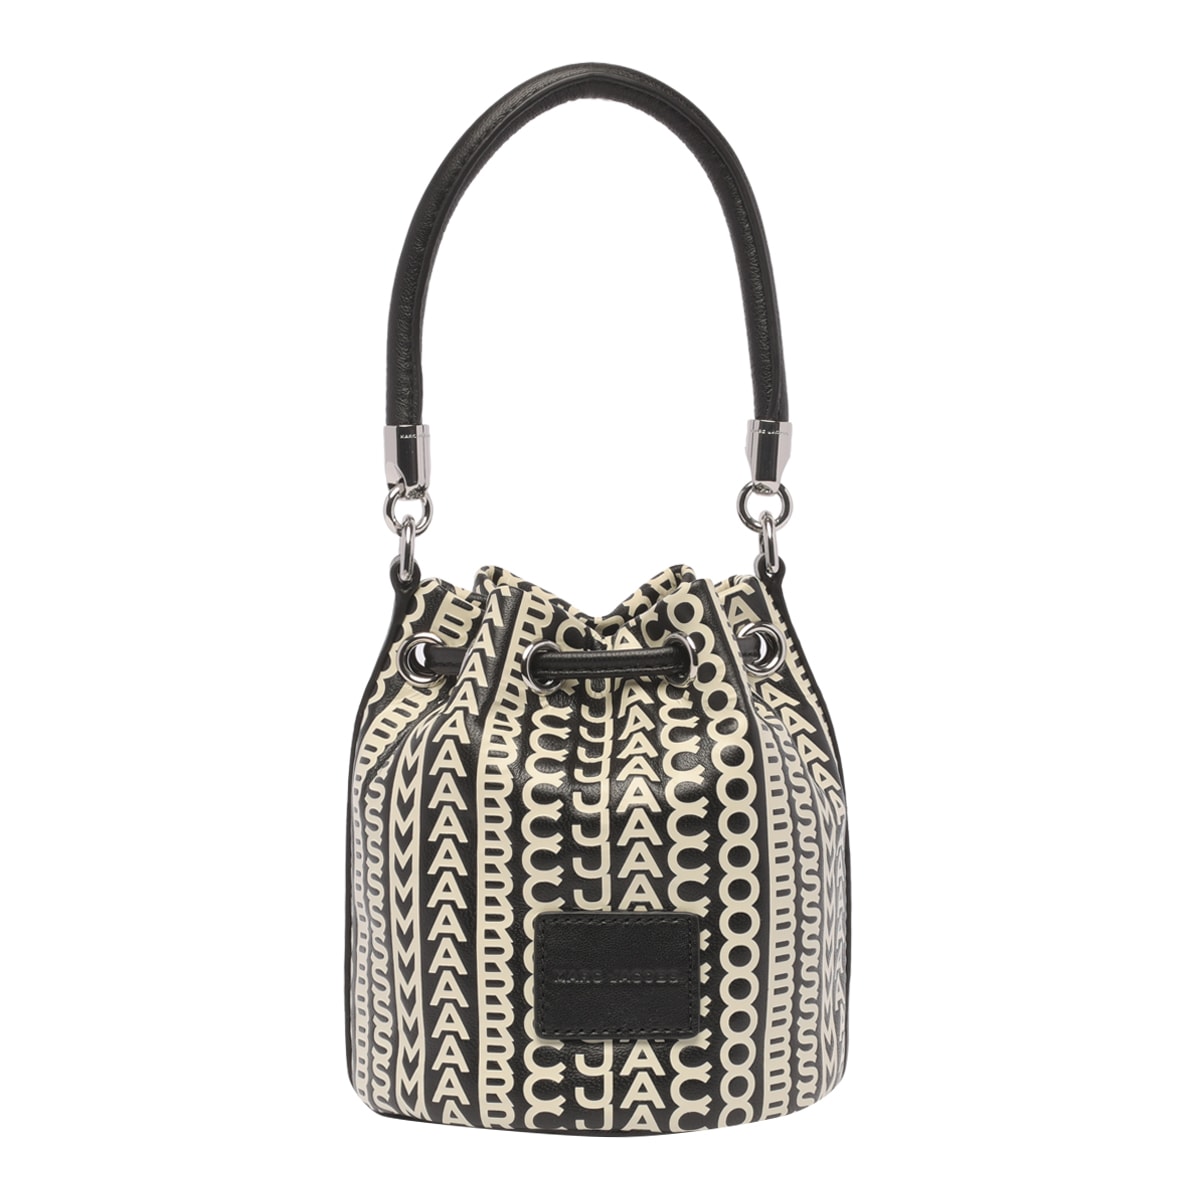 Marc Jacobs The Micro Bucket Bag In Black/white